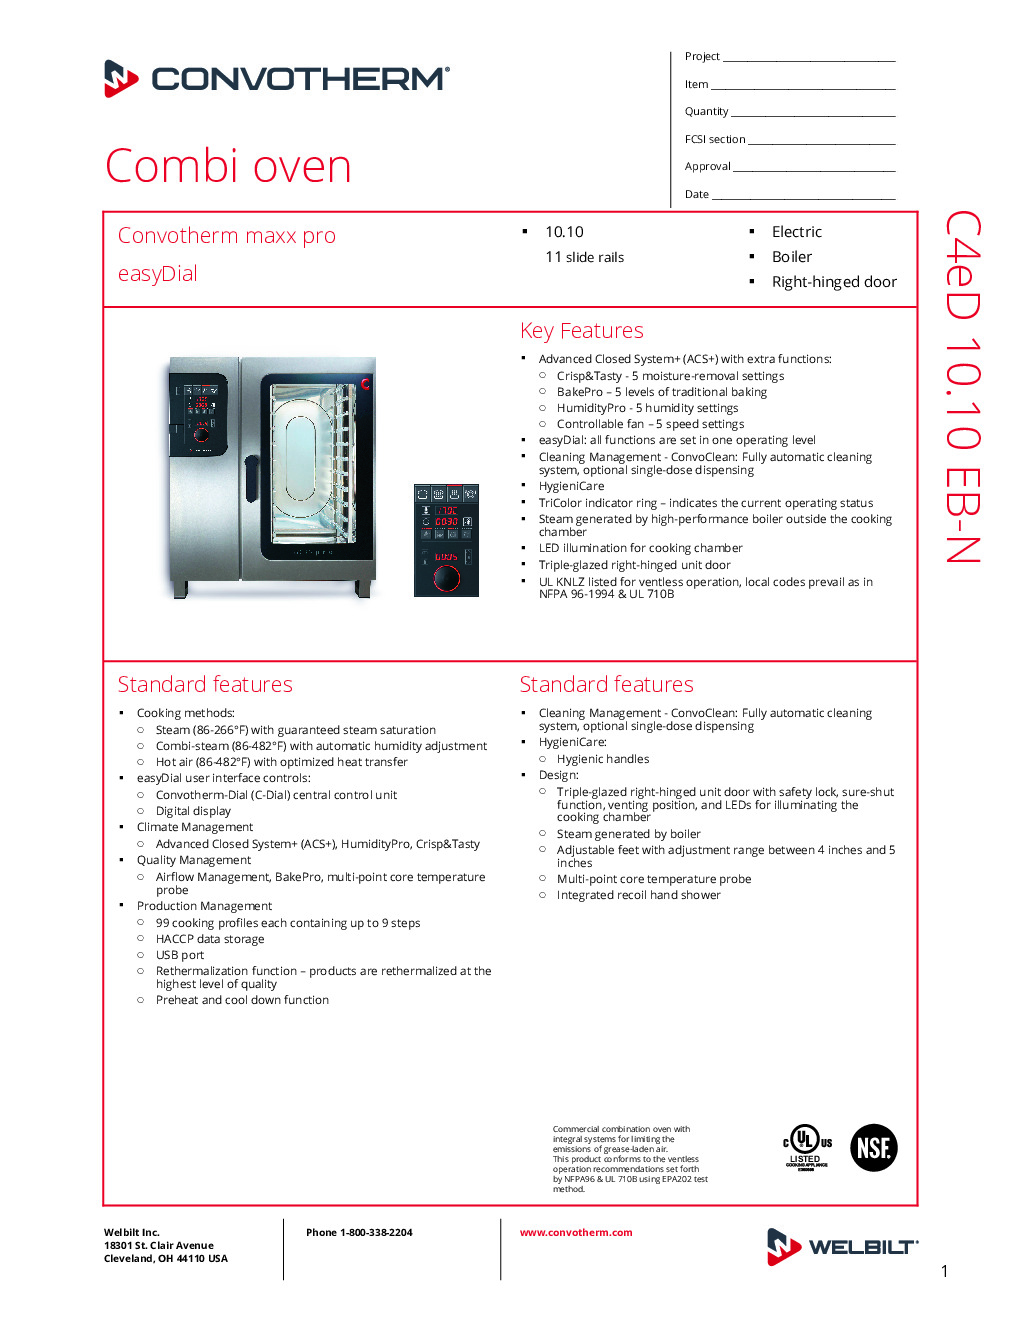 Convotherm C4 ED 10.10EB-N Electric Combi Oven